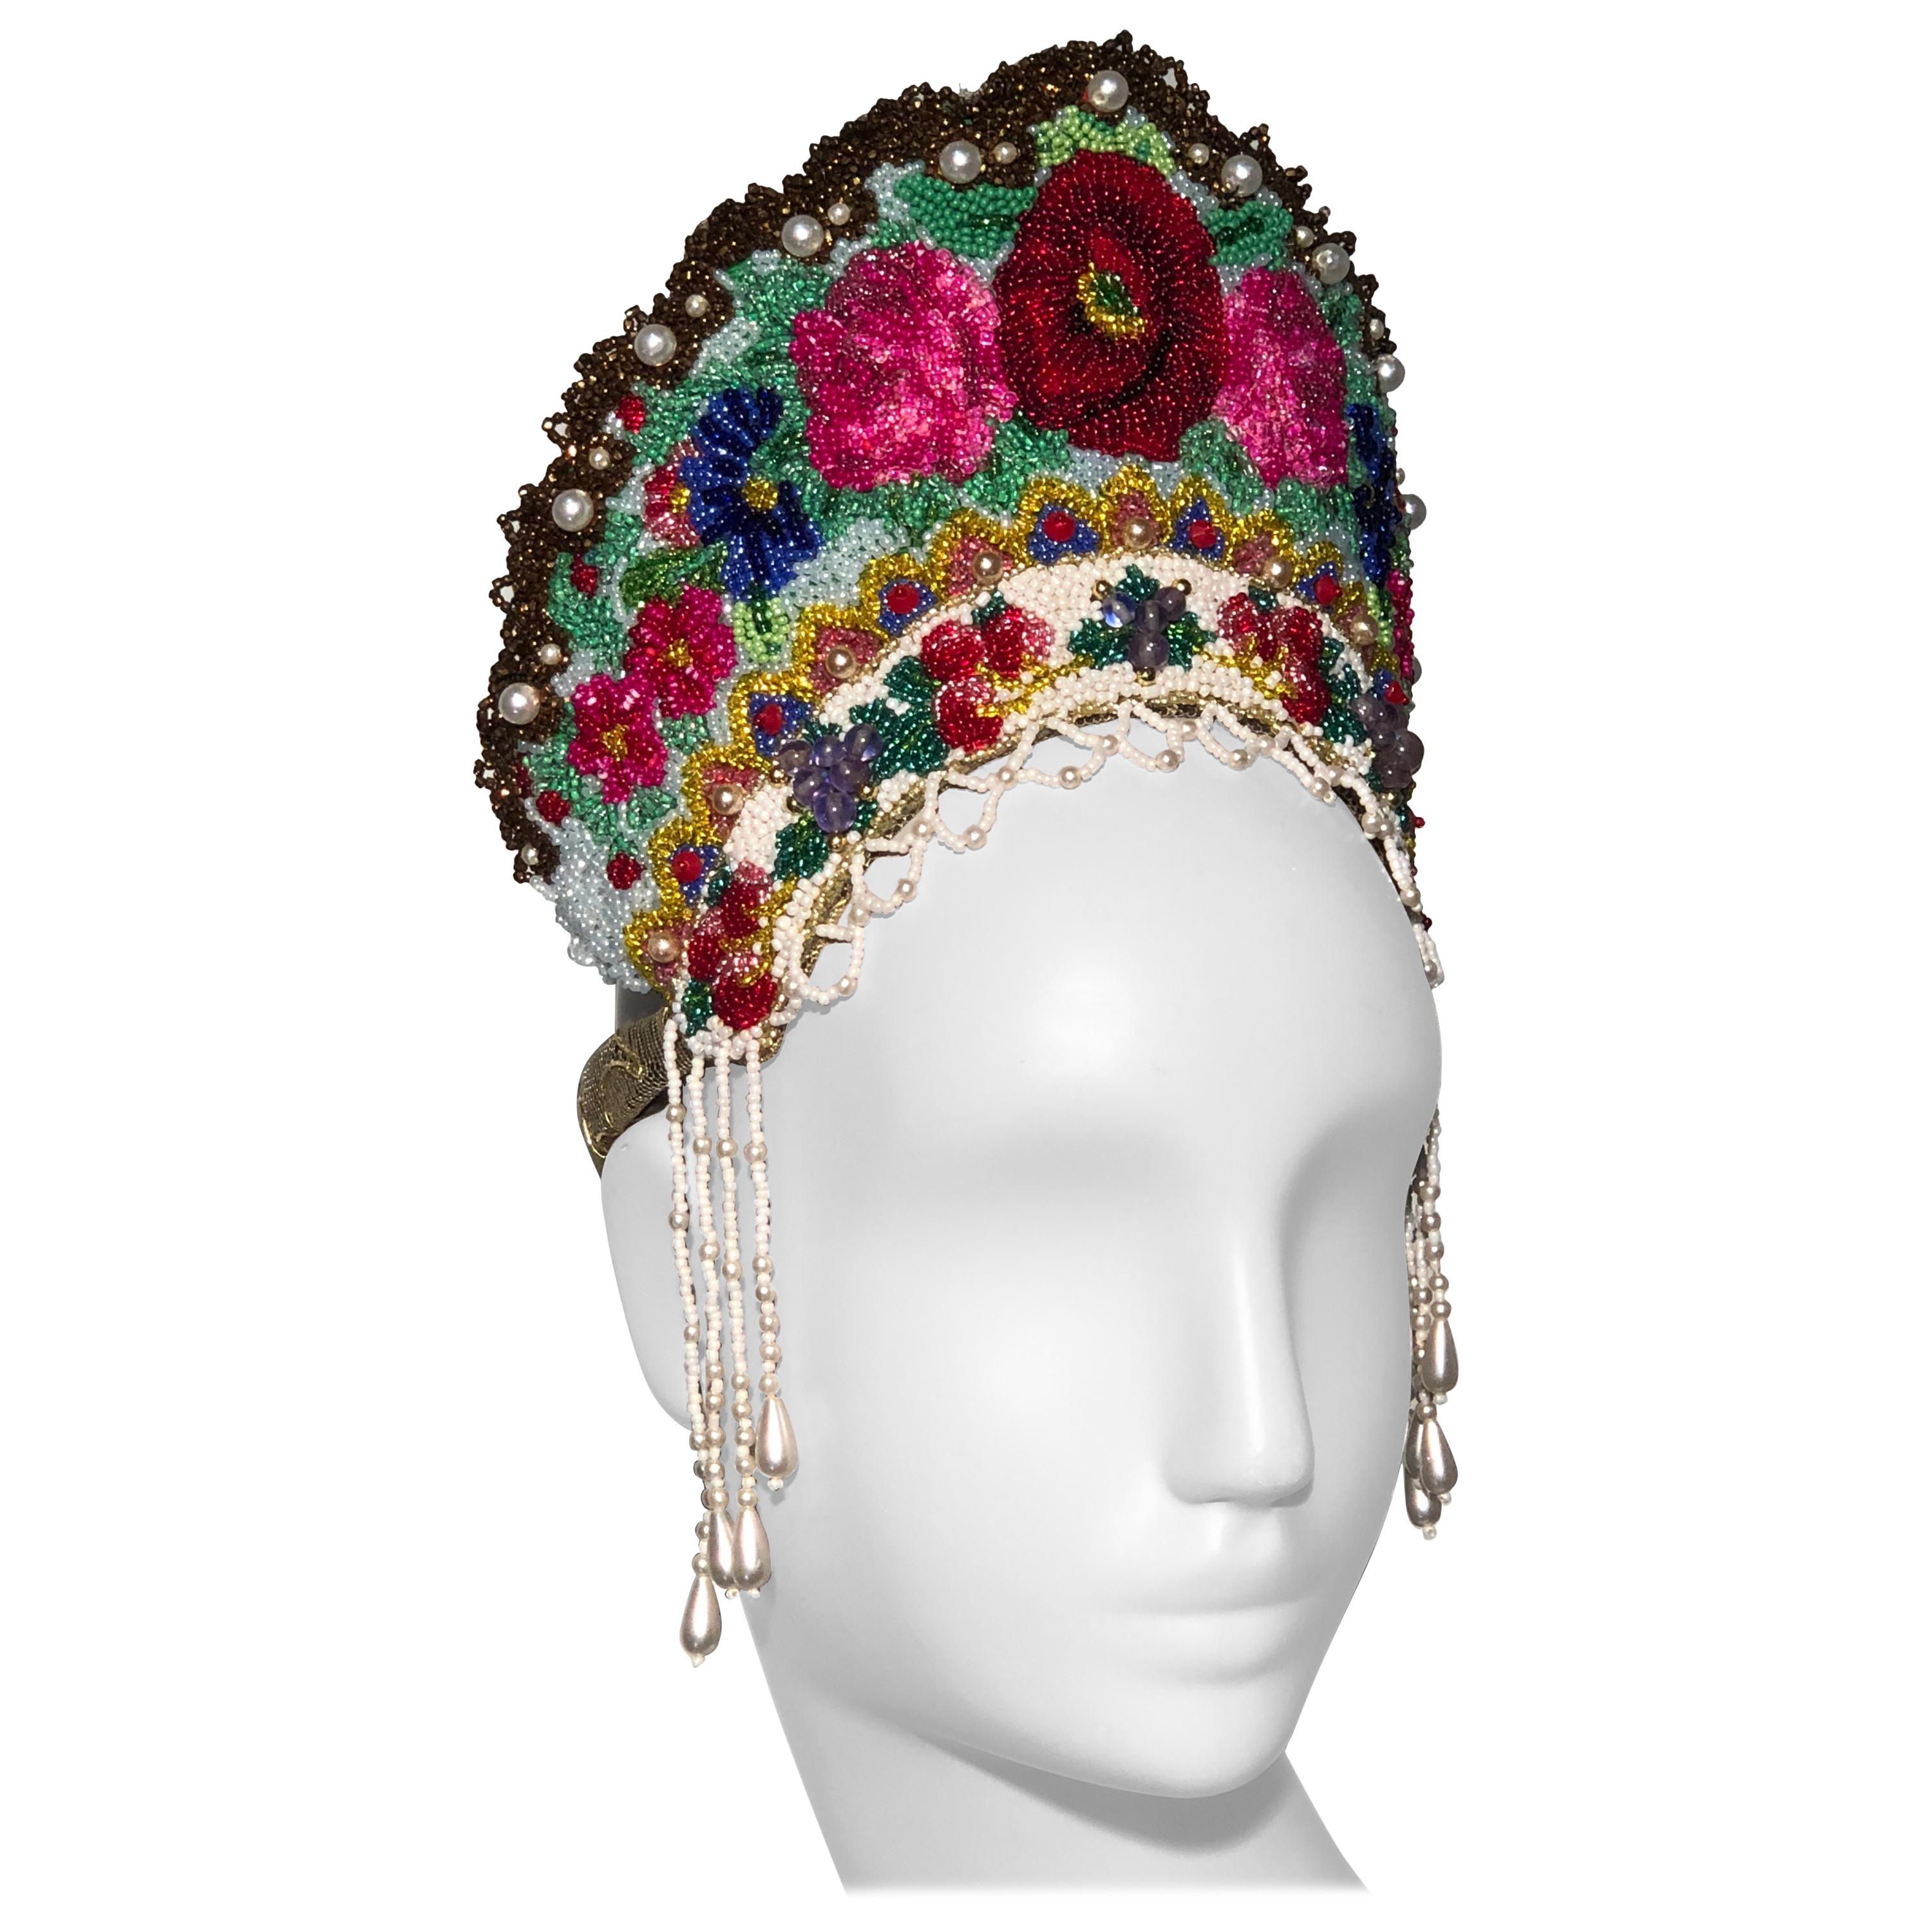 Torso Creations Russian Beaded Floral Mantilla Crown W/ Gold Lace Details